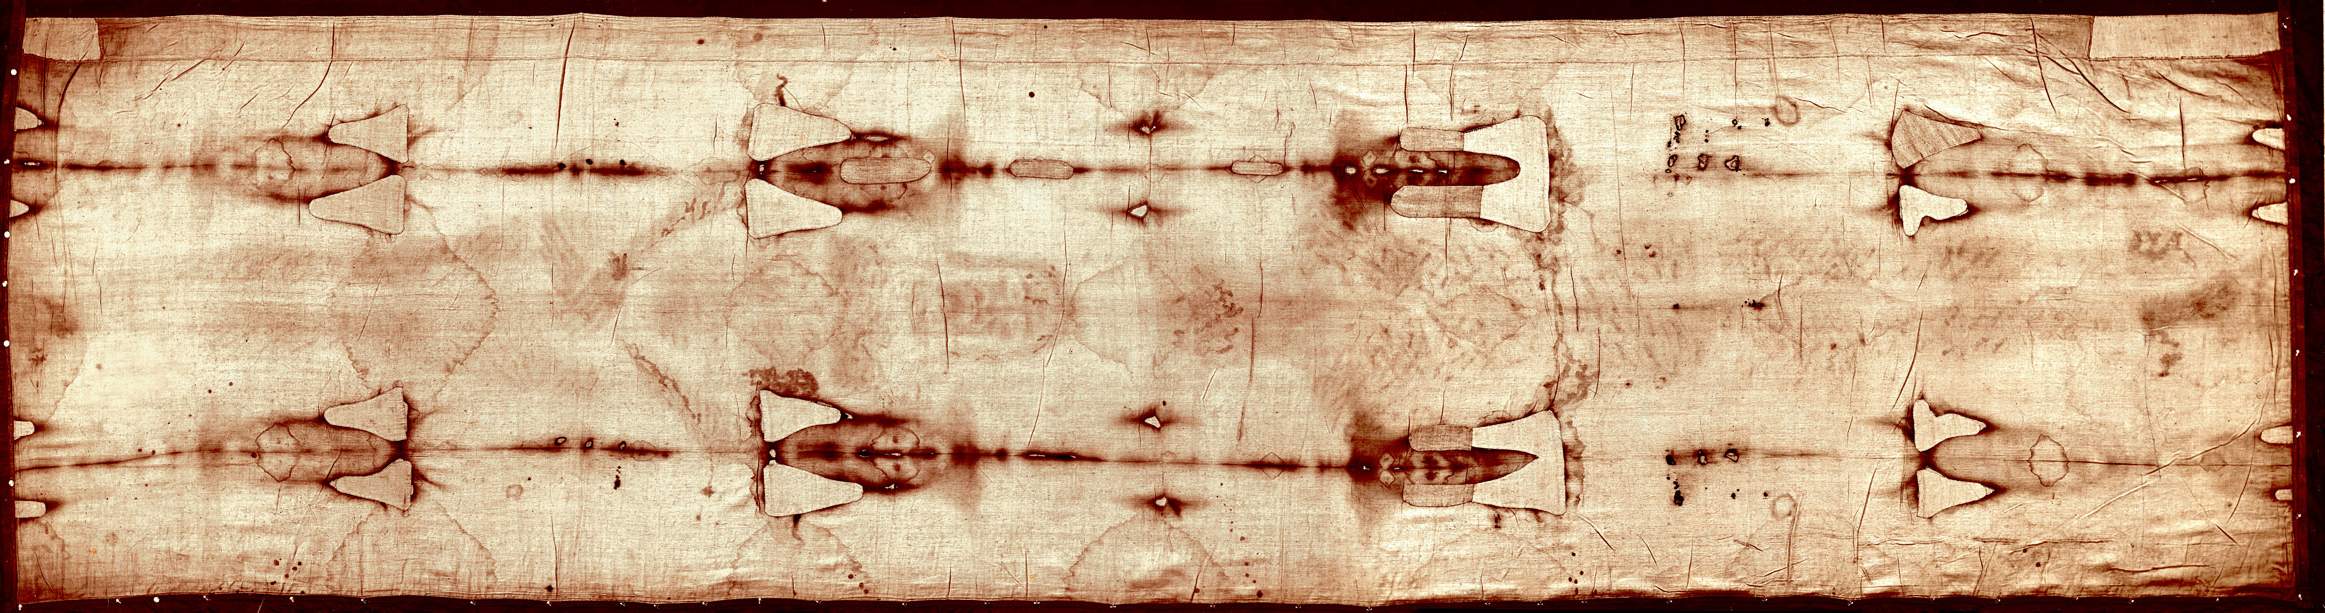 The Shroud of Turin: Some interesting things you should know 1